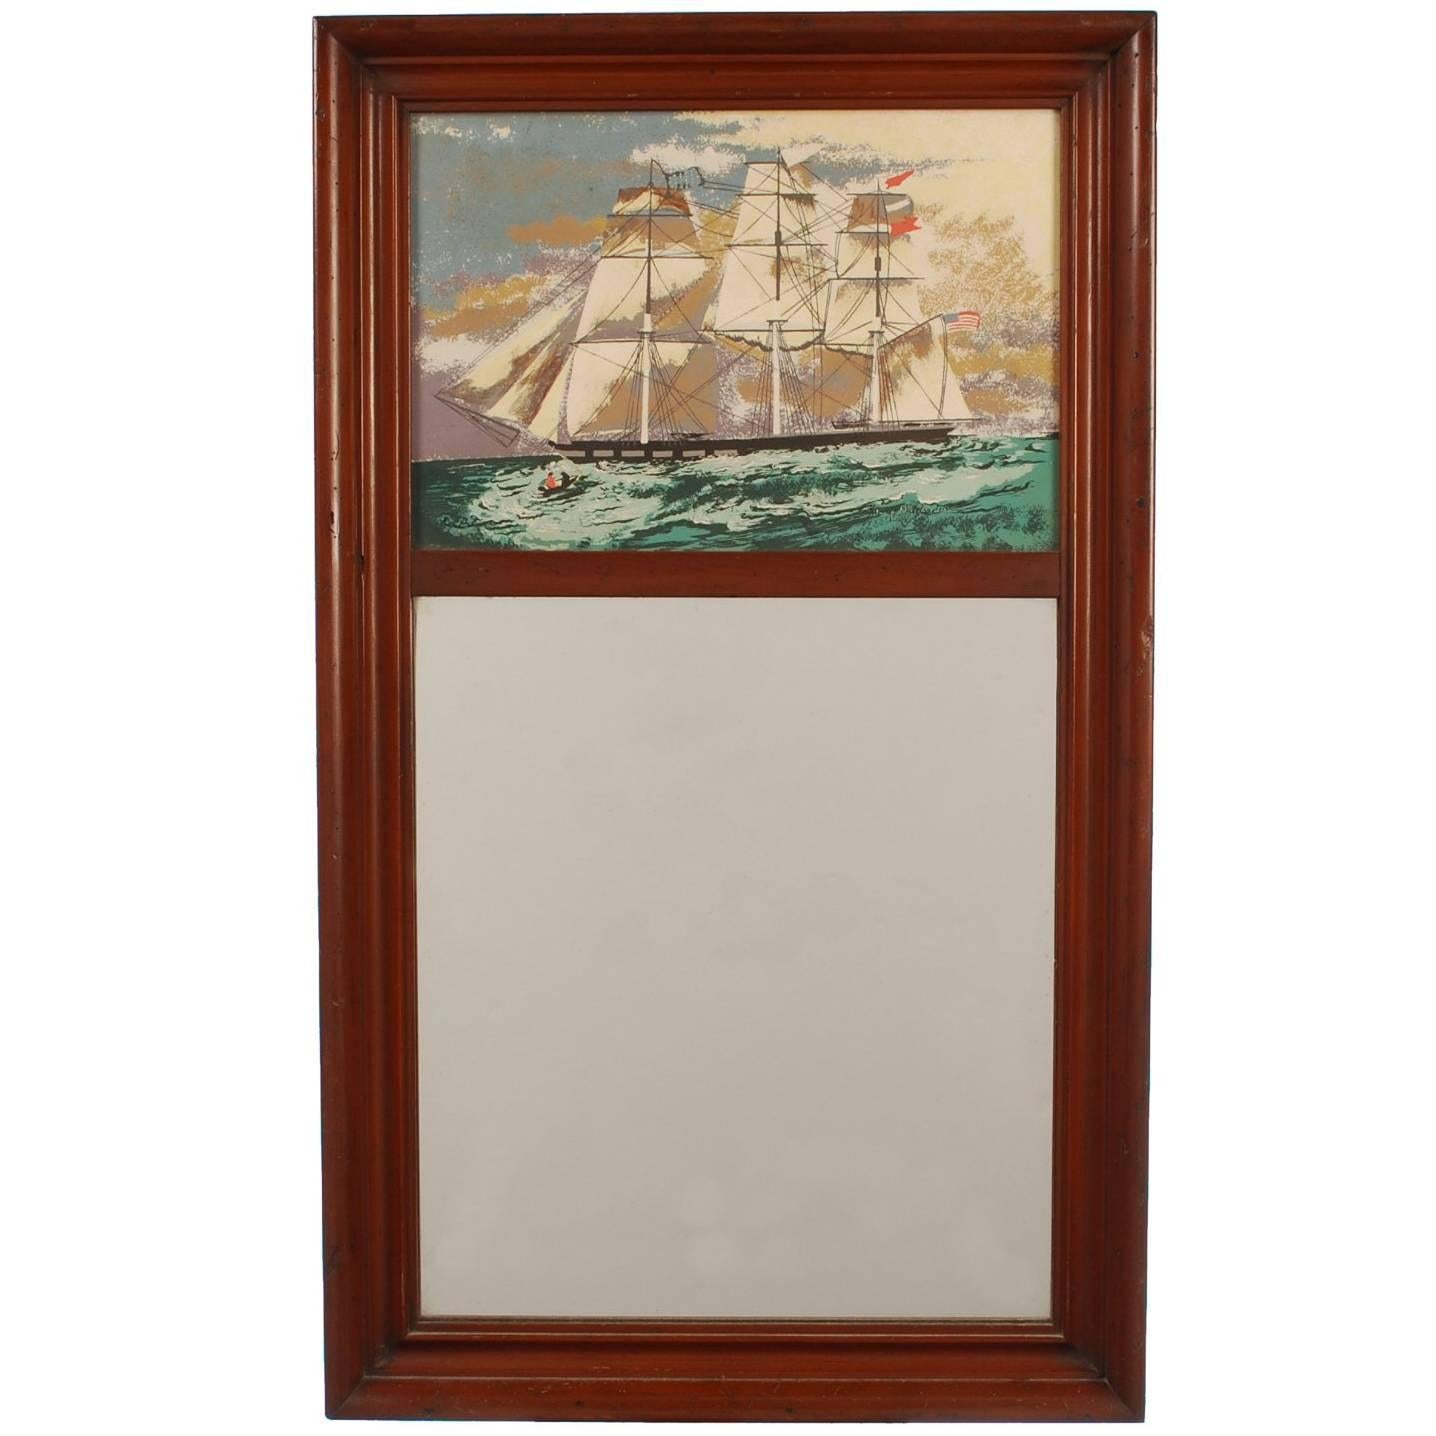 Trumeau Wall Mirror with Tall Ship Painting by Margo Alexander For Sale